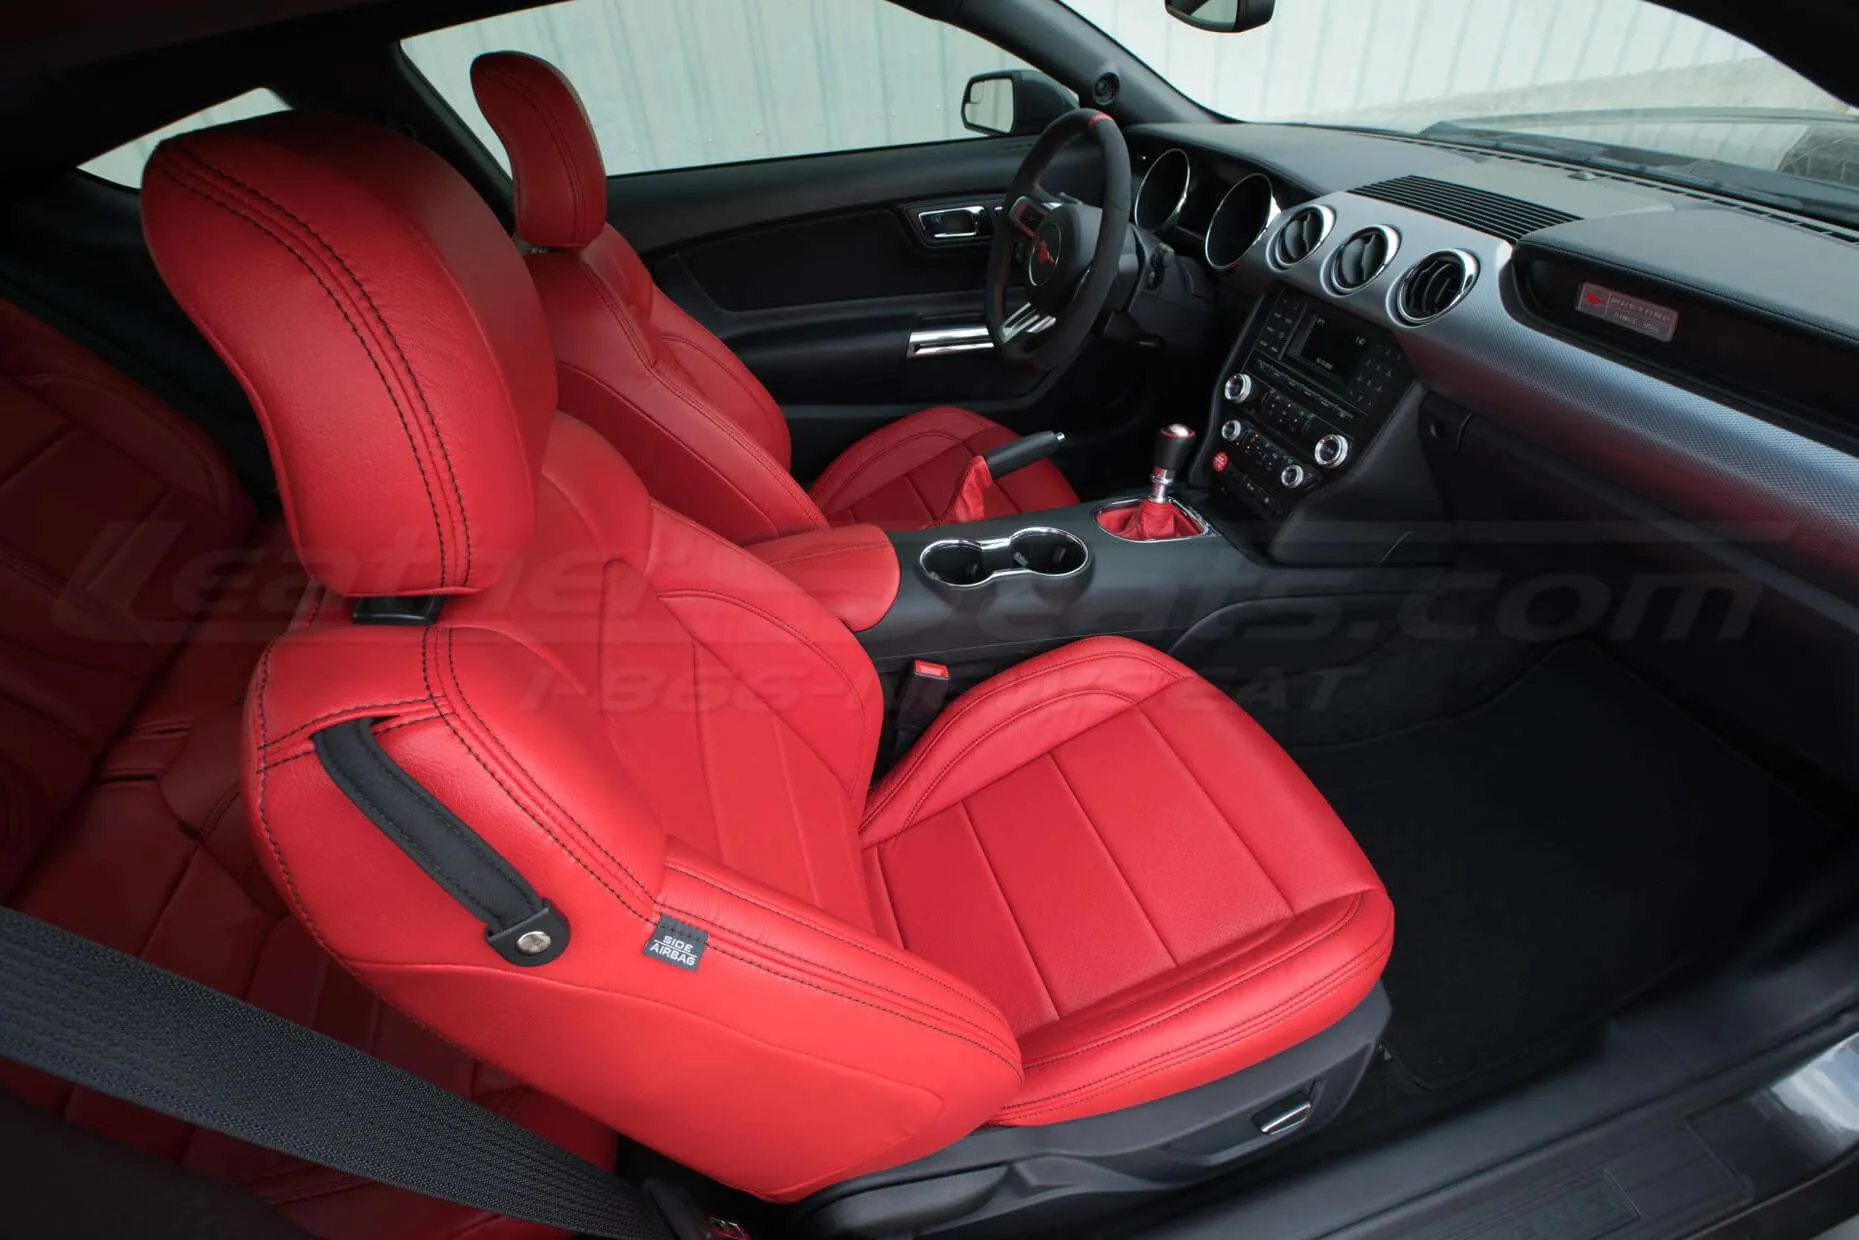 Ford Mustang Bright Red Upholstery Kit - Installed - Passenger seat